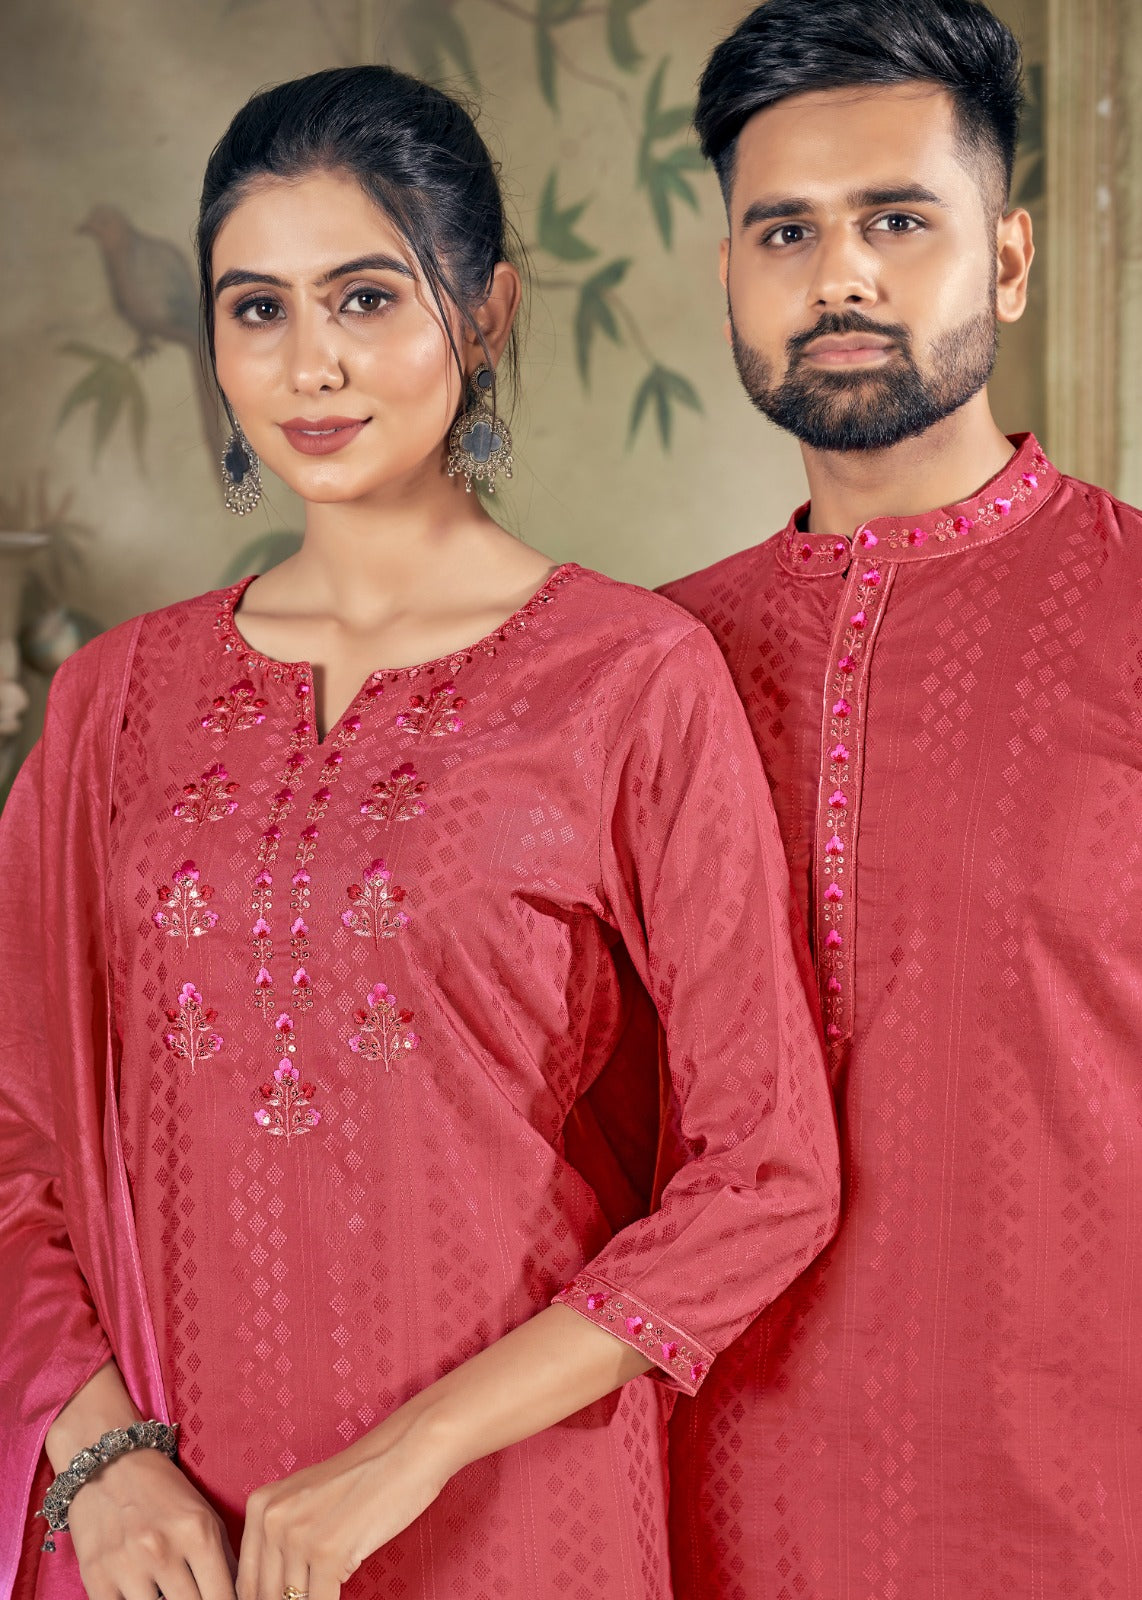 Couple matching Outfit | Couple dress, Couple wedding dress, Wedding  matching outfits